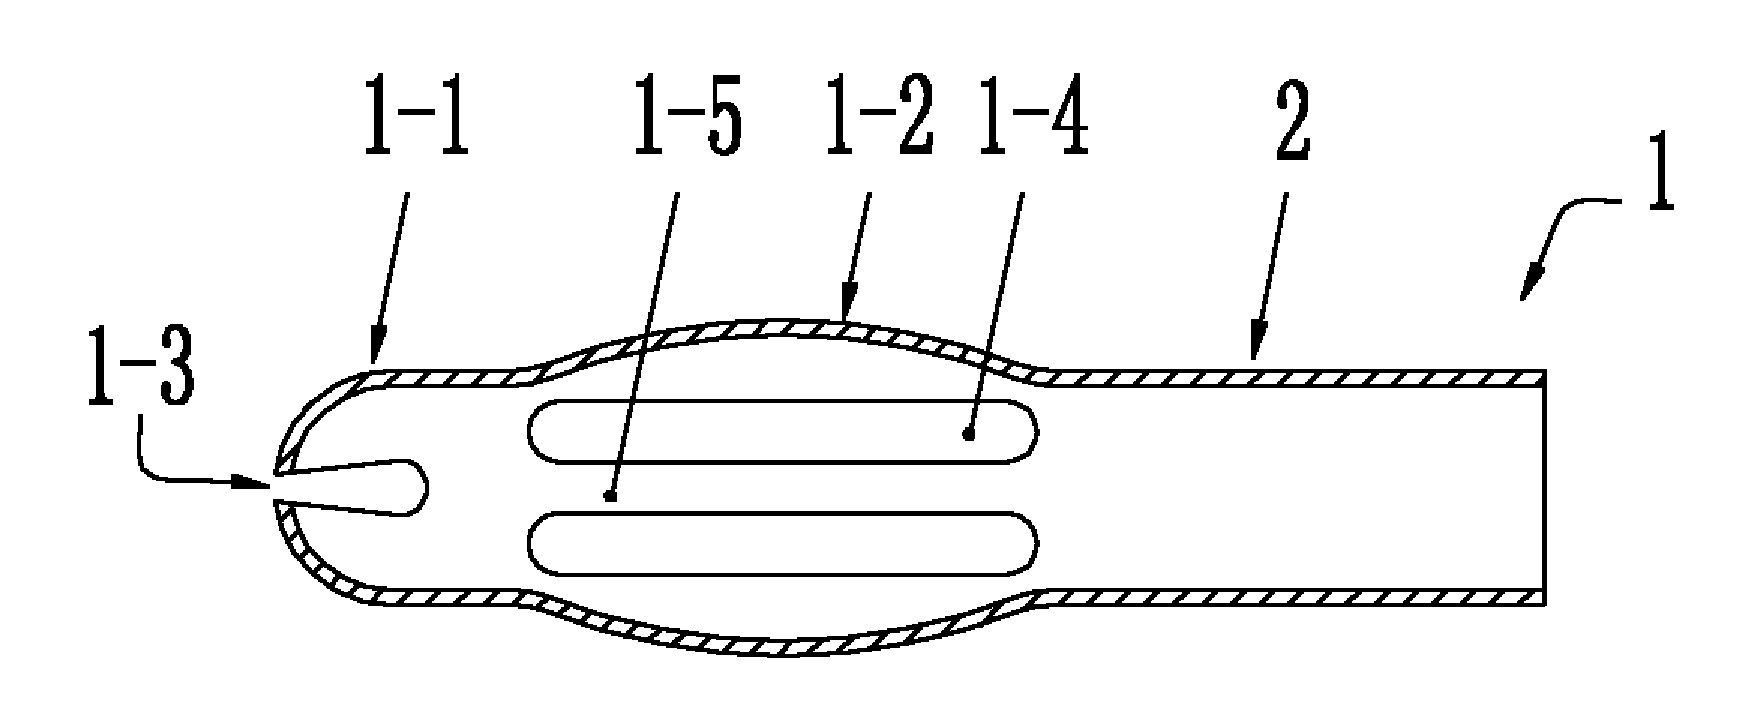 Pin contact and electric connector using pin contact